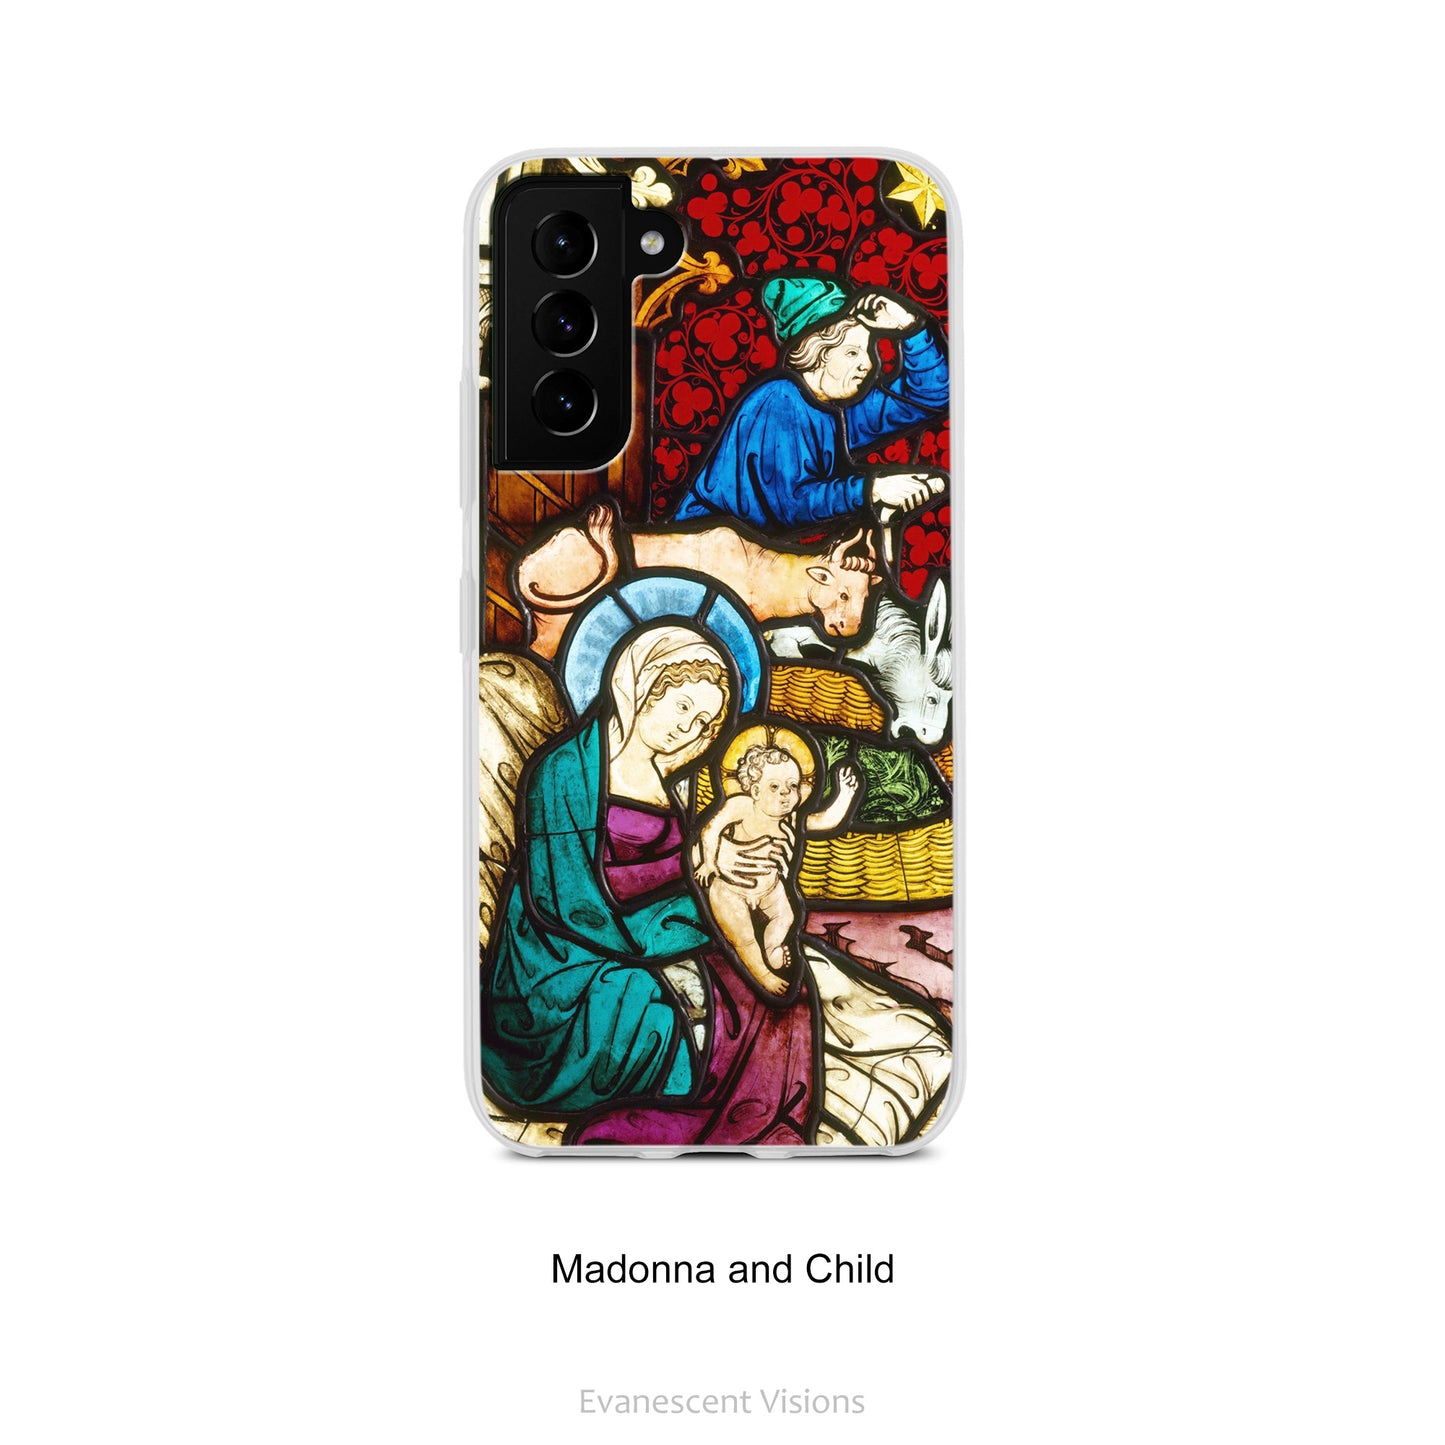 Option 'Madonna and Child' for the Stained Glass Church Window Image Phone Cases for Samsung phones